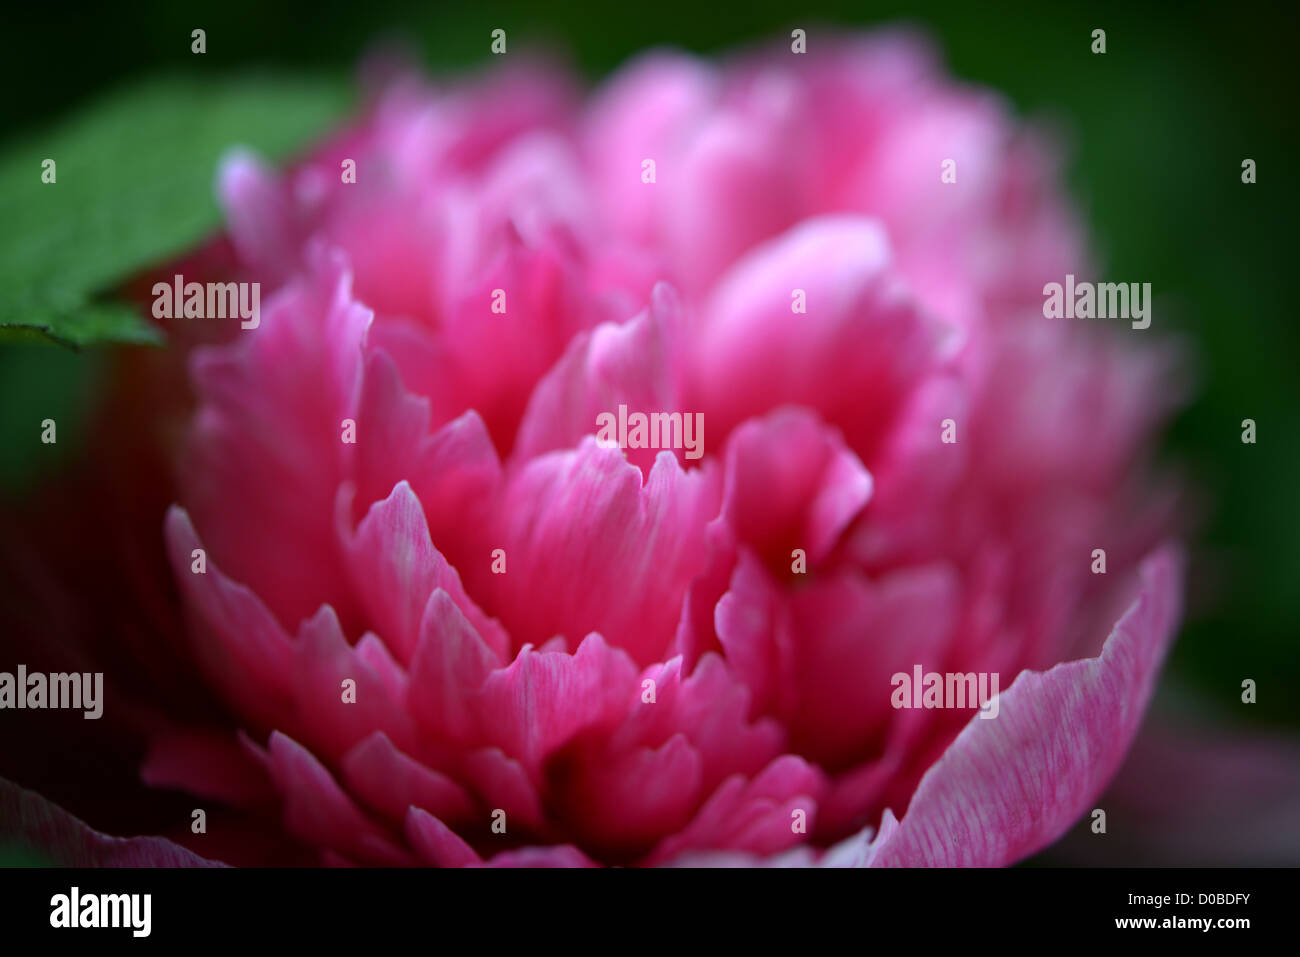 Pink Paeony in a restricted focus image Stock Photo